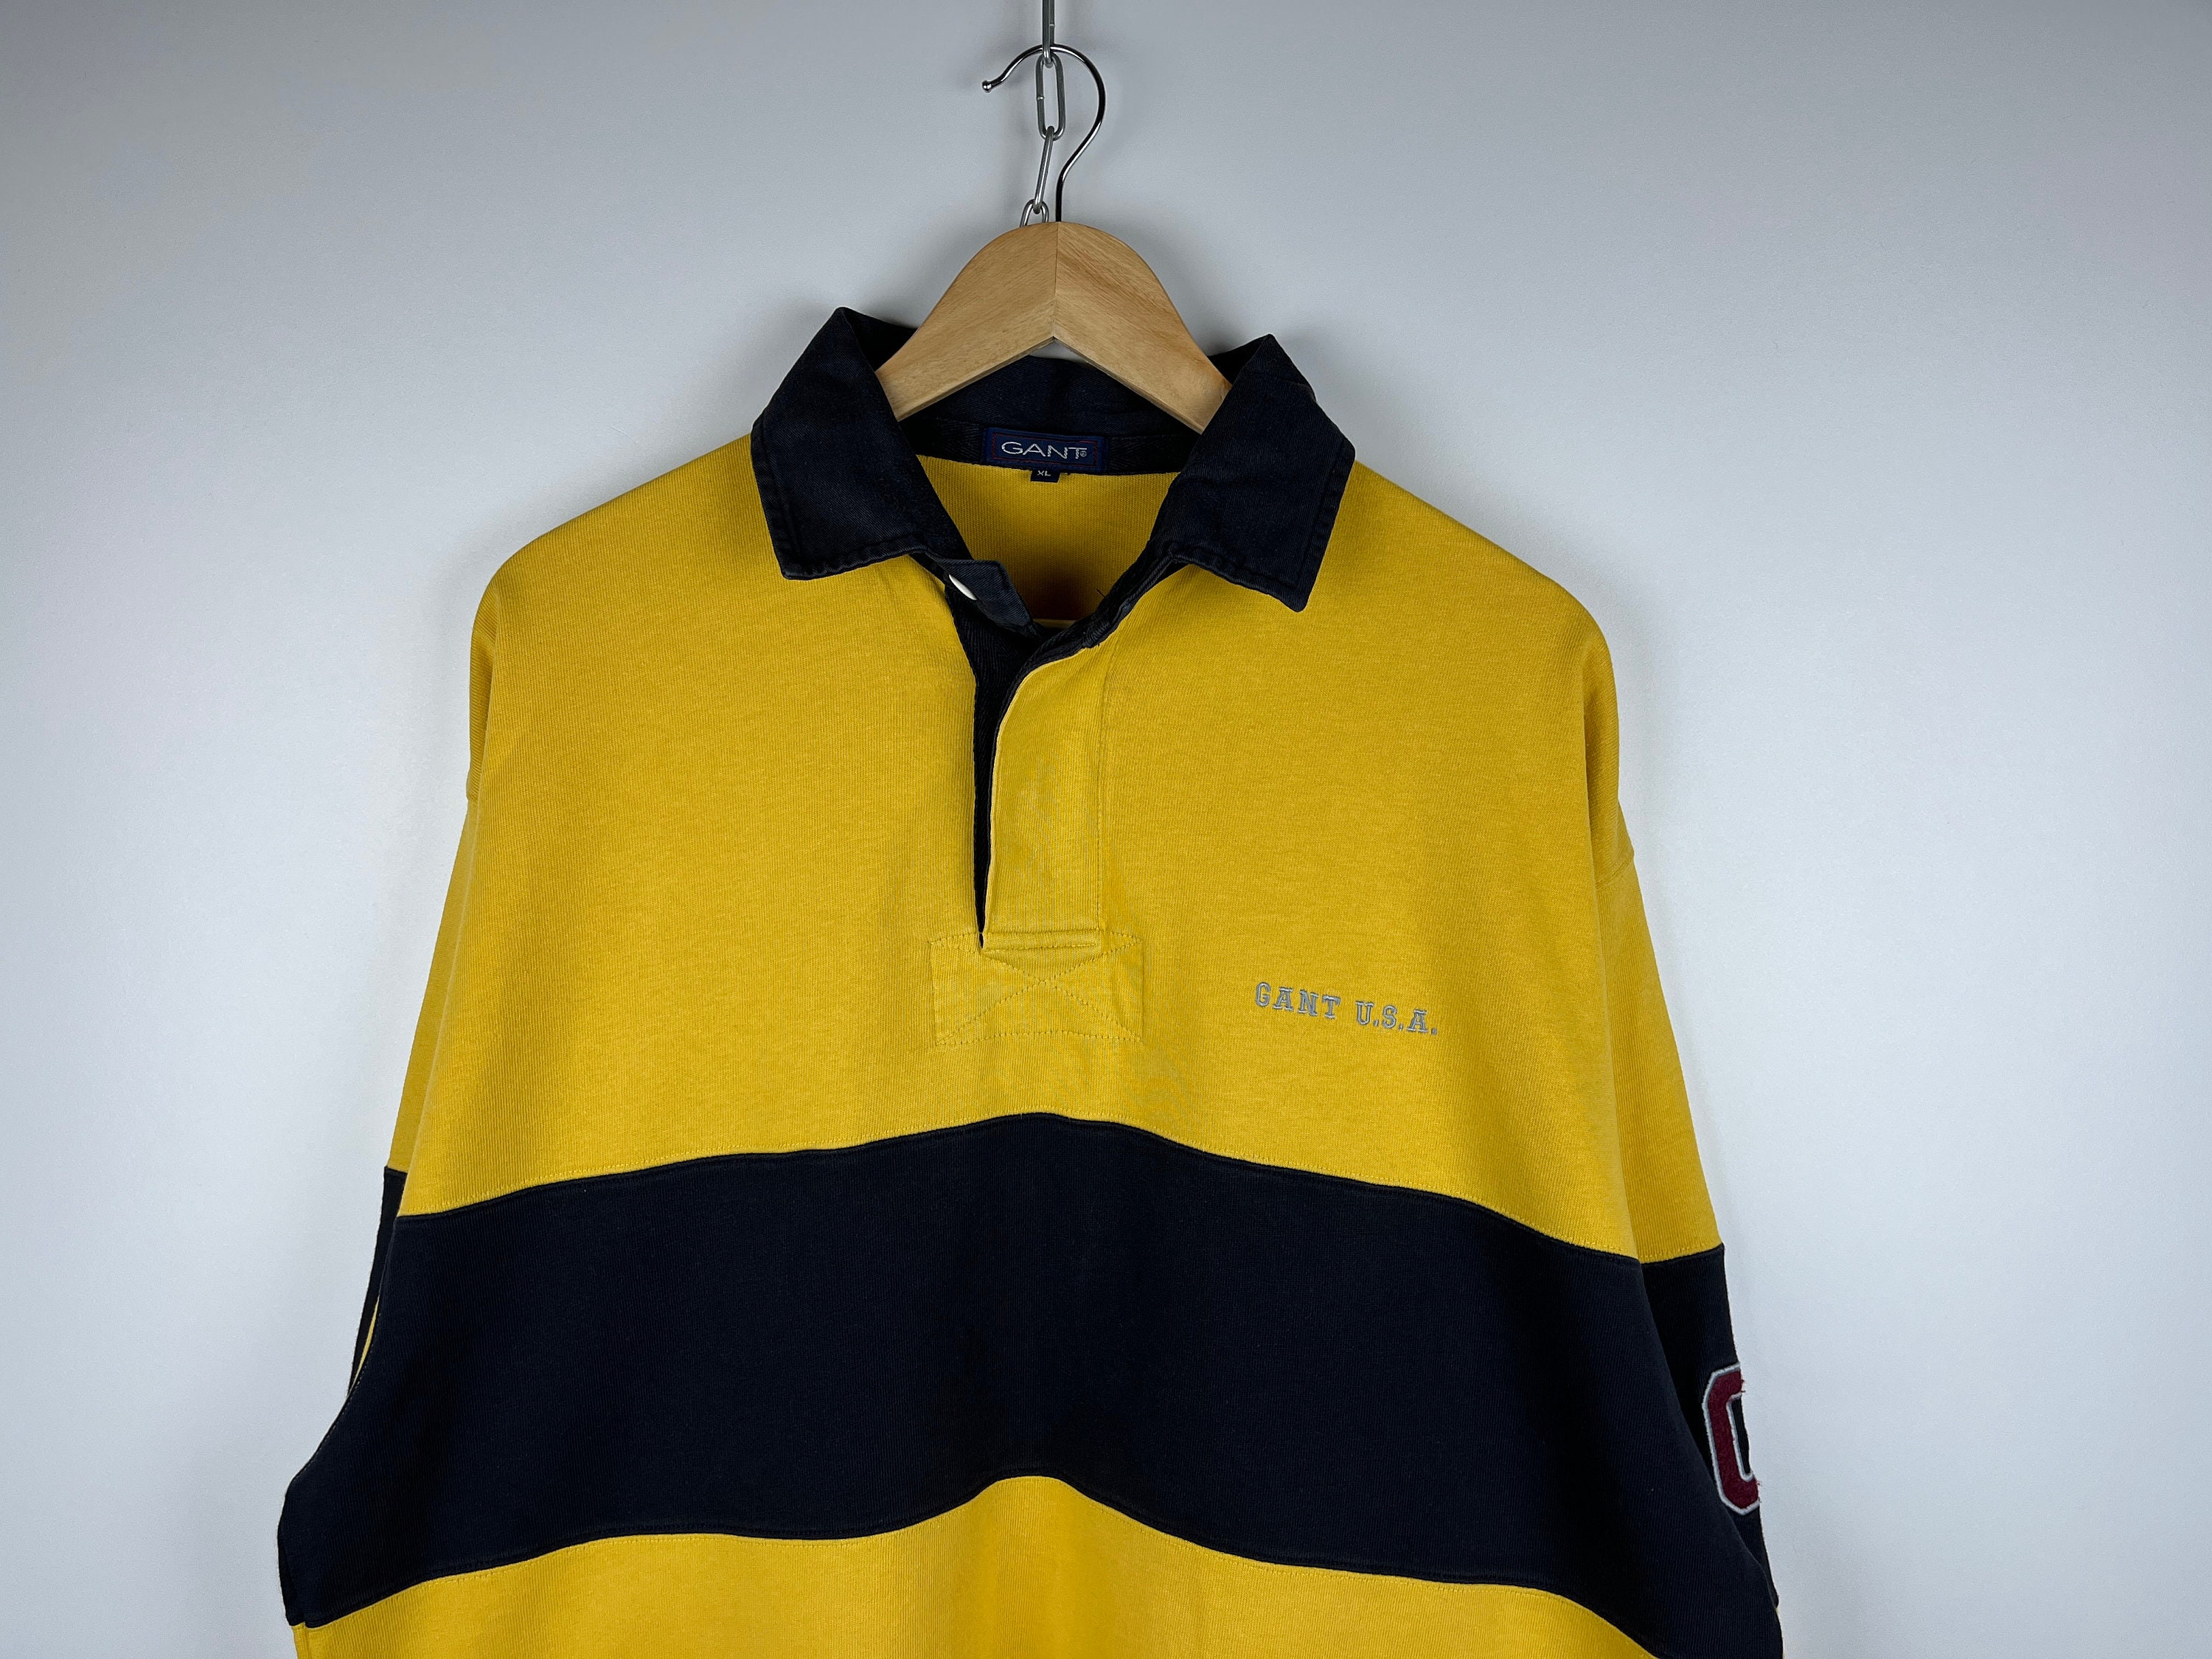 90's Gant USA Vintage Rugby Shirt Size XL Relaxed Fit Retro